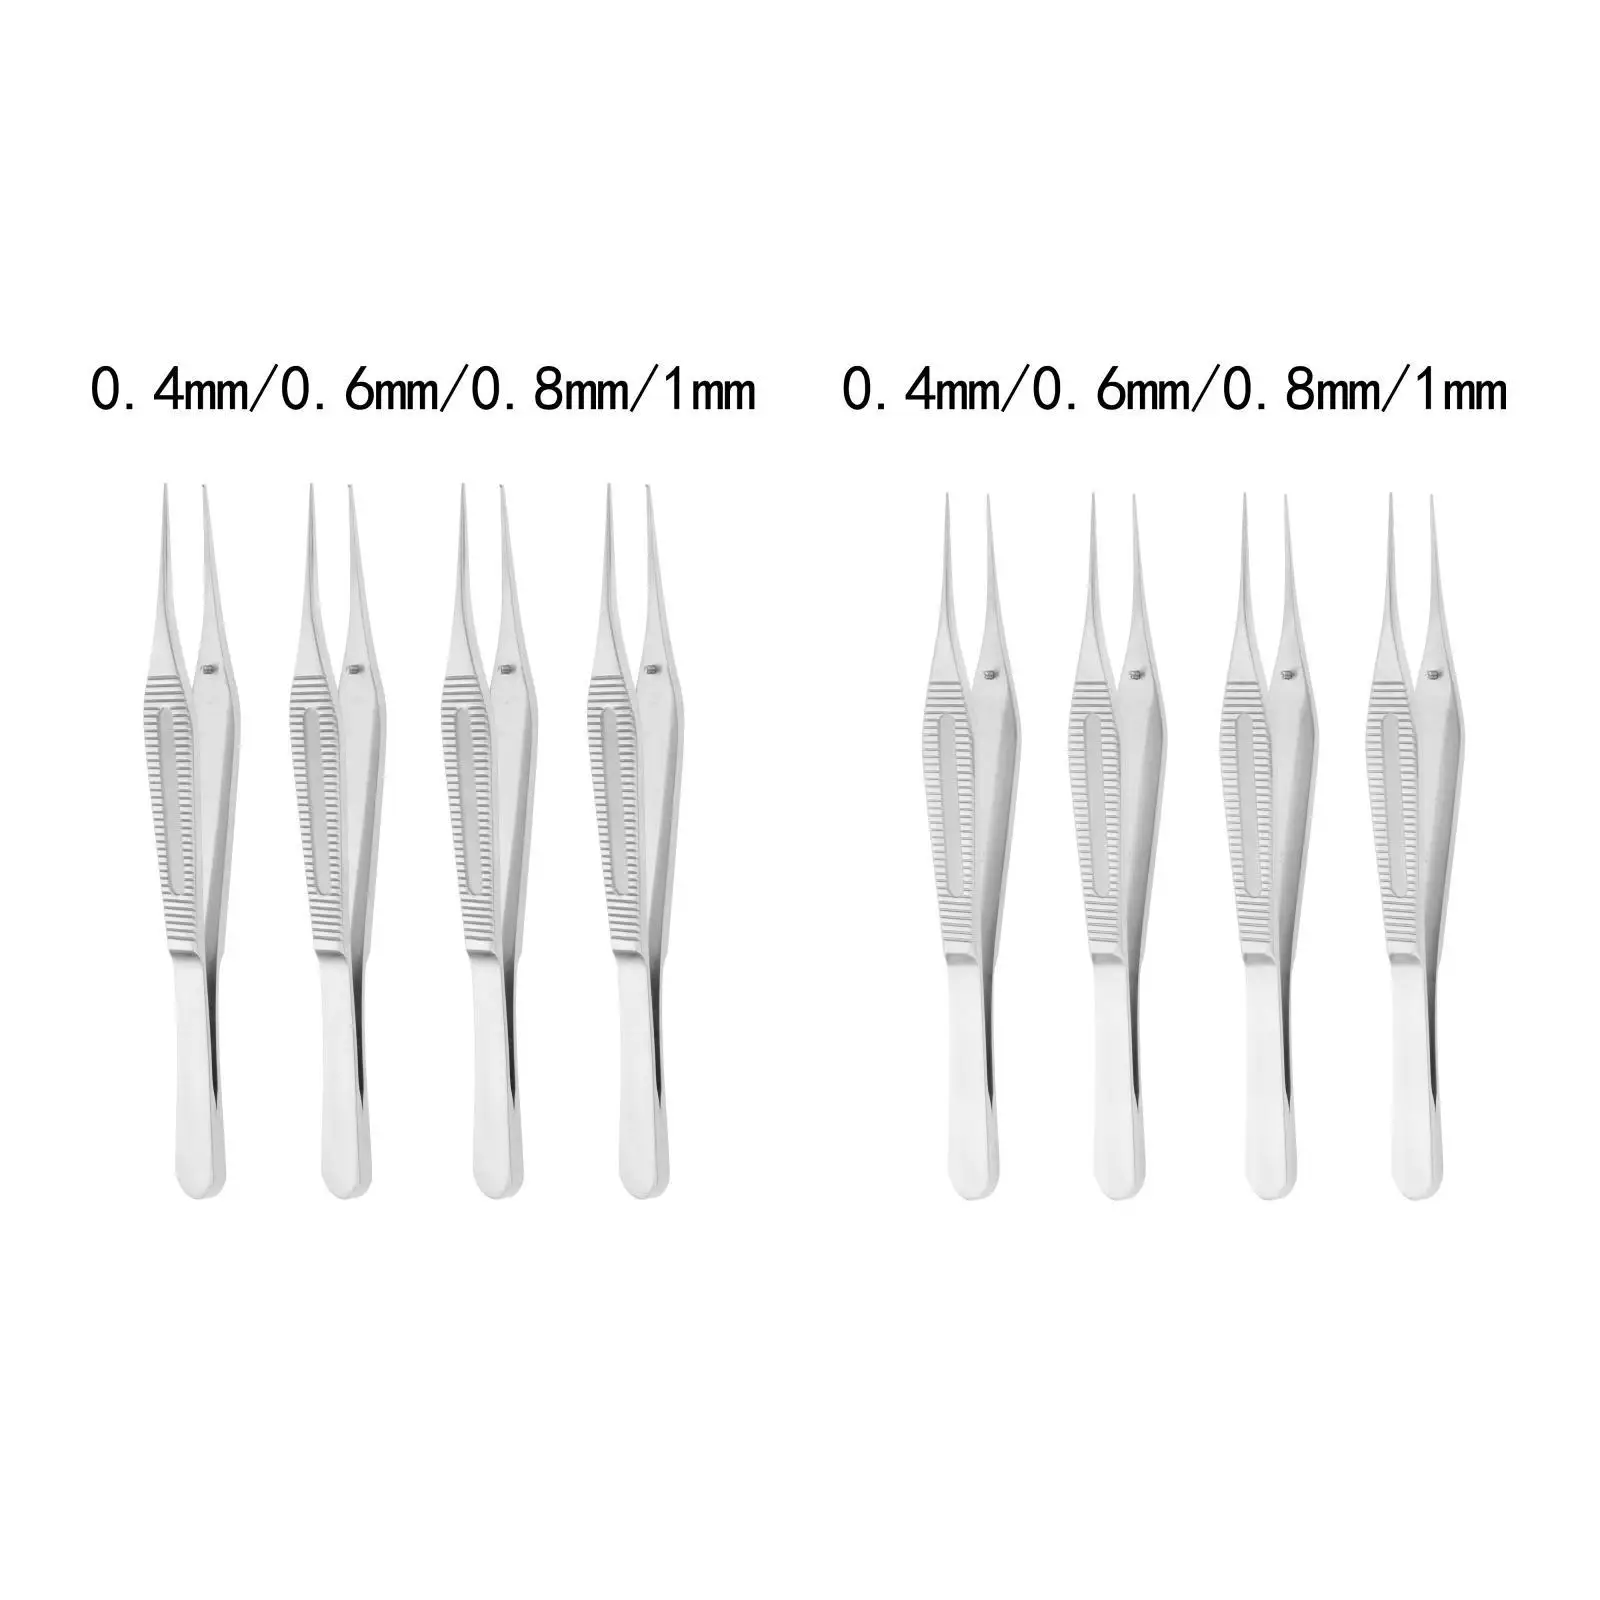 Long Tweezers Pointed Micro Forceps Repair Tool for Microscopes Hotel